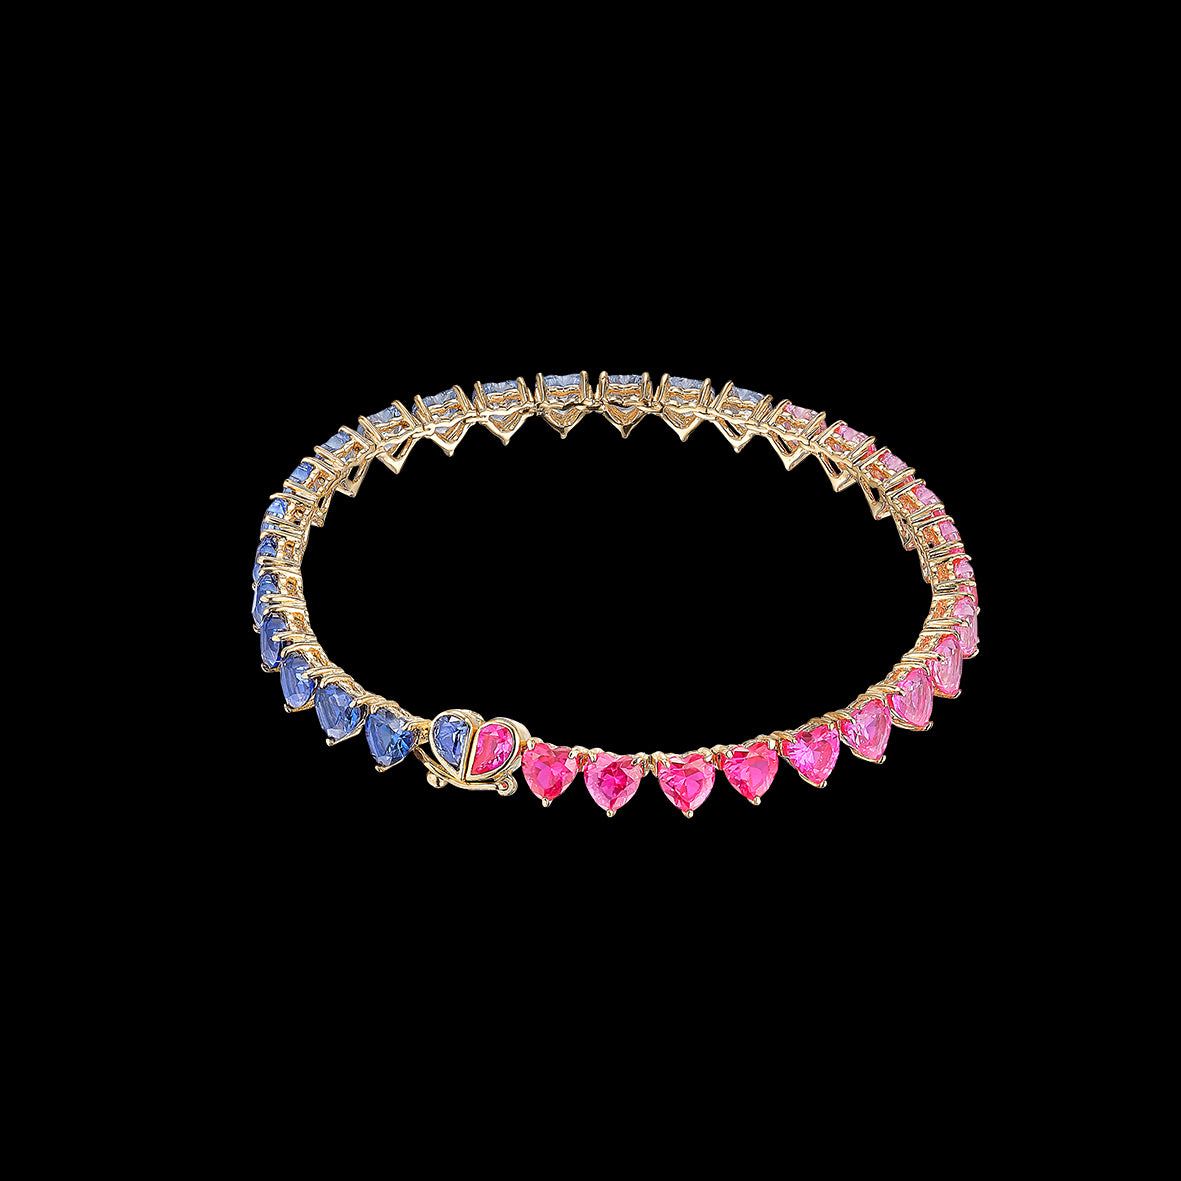 Magenta Eternity Heart Bracelet, Bracelet, Anabela Chan Joaillerie - Fine jewelry with laboratory grown and created gemstones hand-crafted in the United Kingdom. Anabela Chan Joaillerie is the first fine jewellery brand in the world to champion laboratory-grown and created gemstones with high jewellery design, artisanal craftsmanship and a focus on ethical and sustainable innovations.